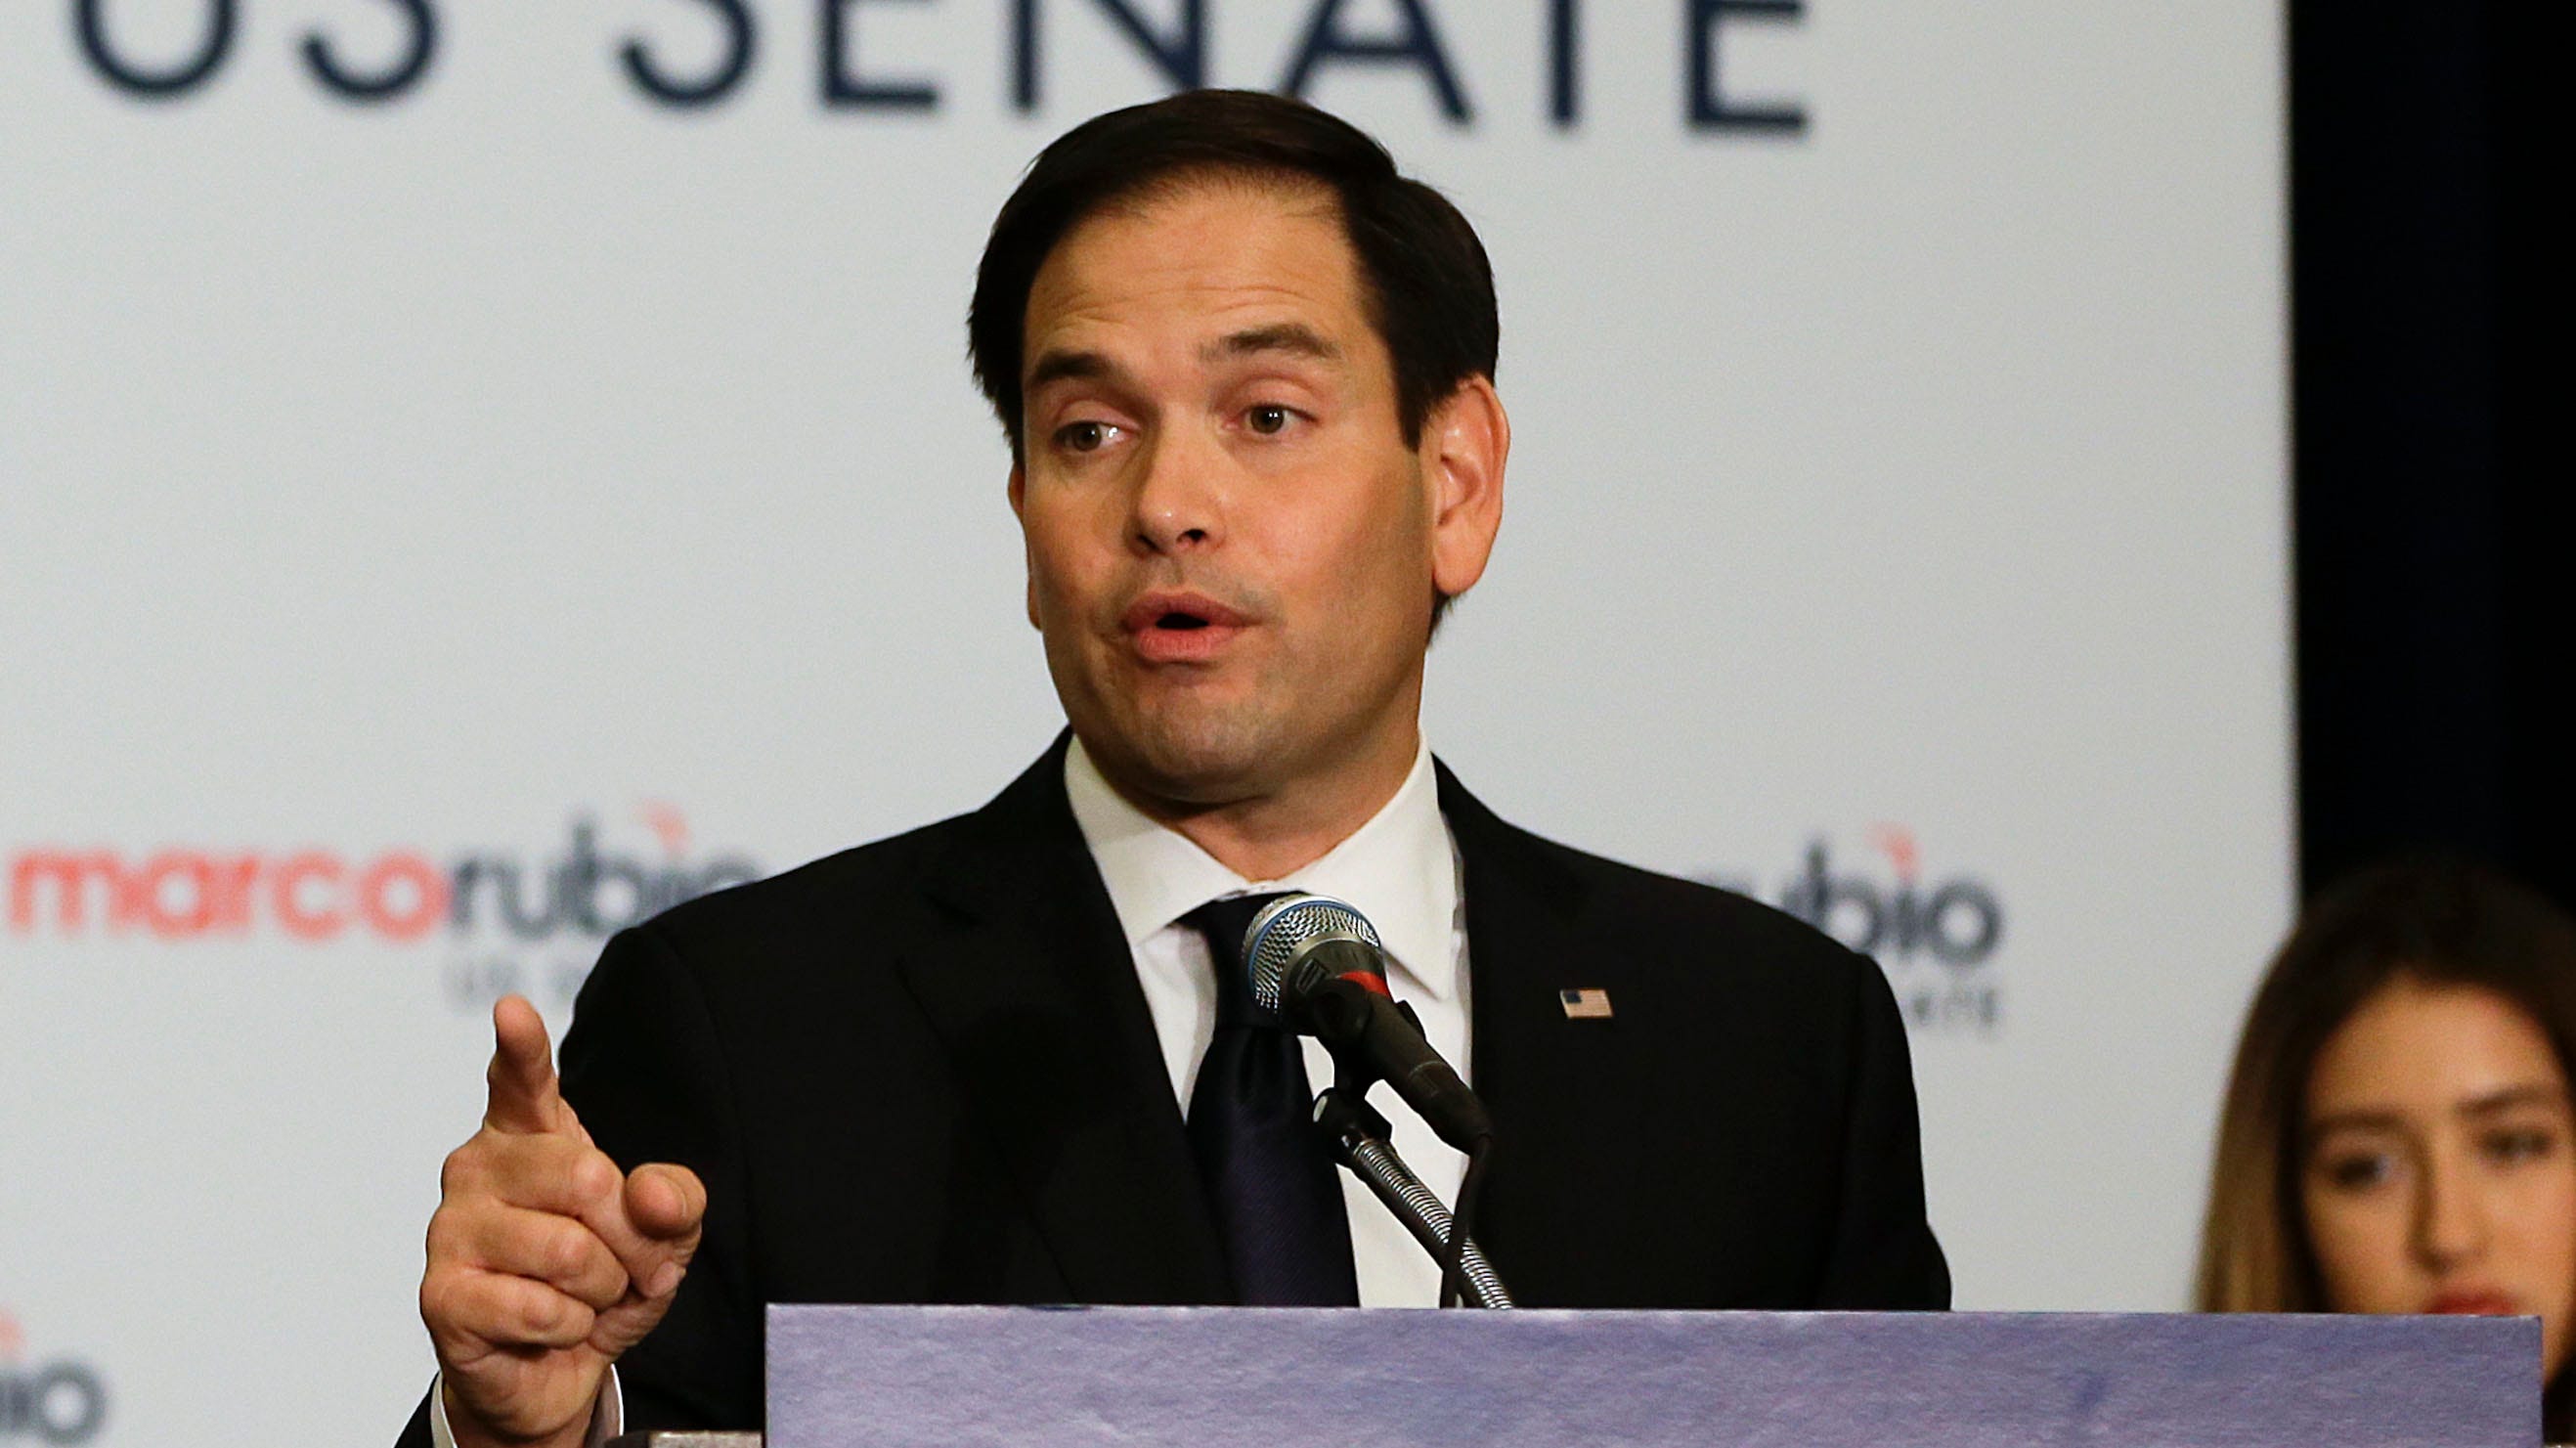 Marco Rubio easily wins Republican nomination to retain his seat in the Senate Fox News photo picture